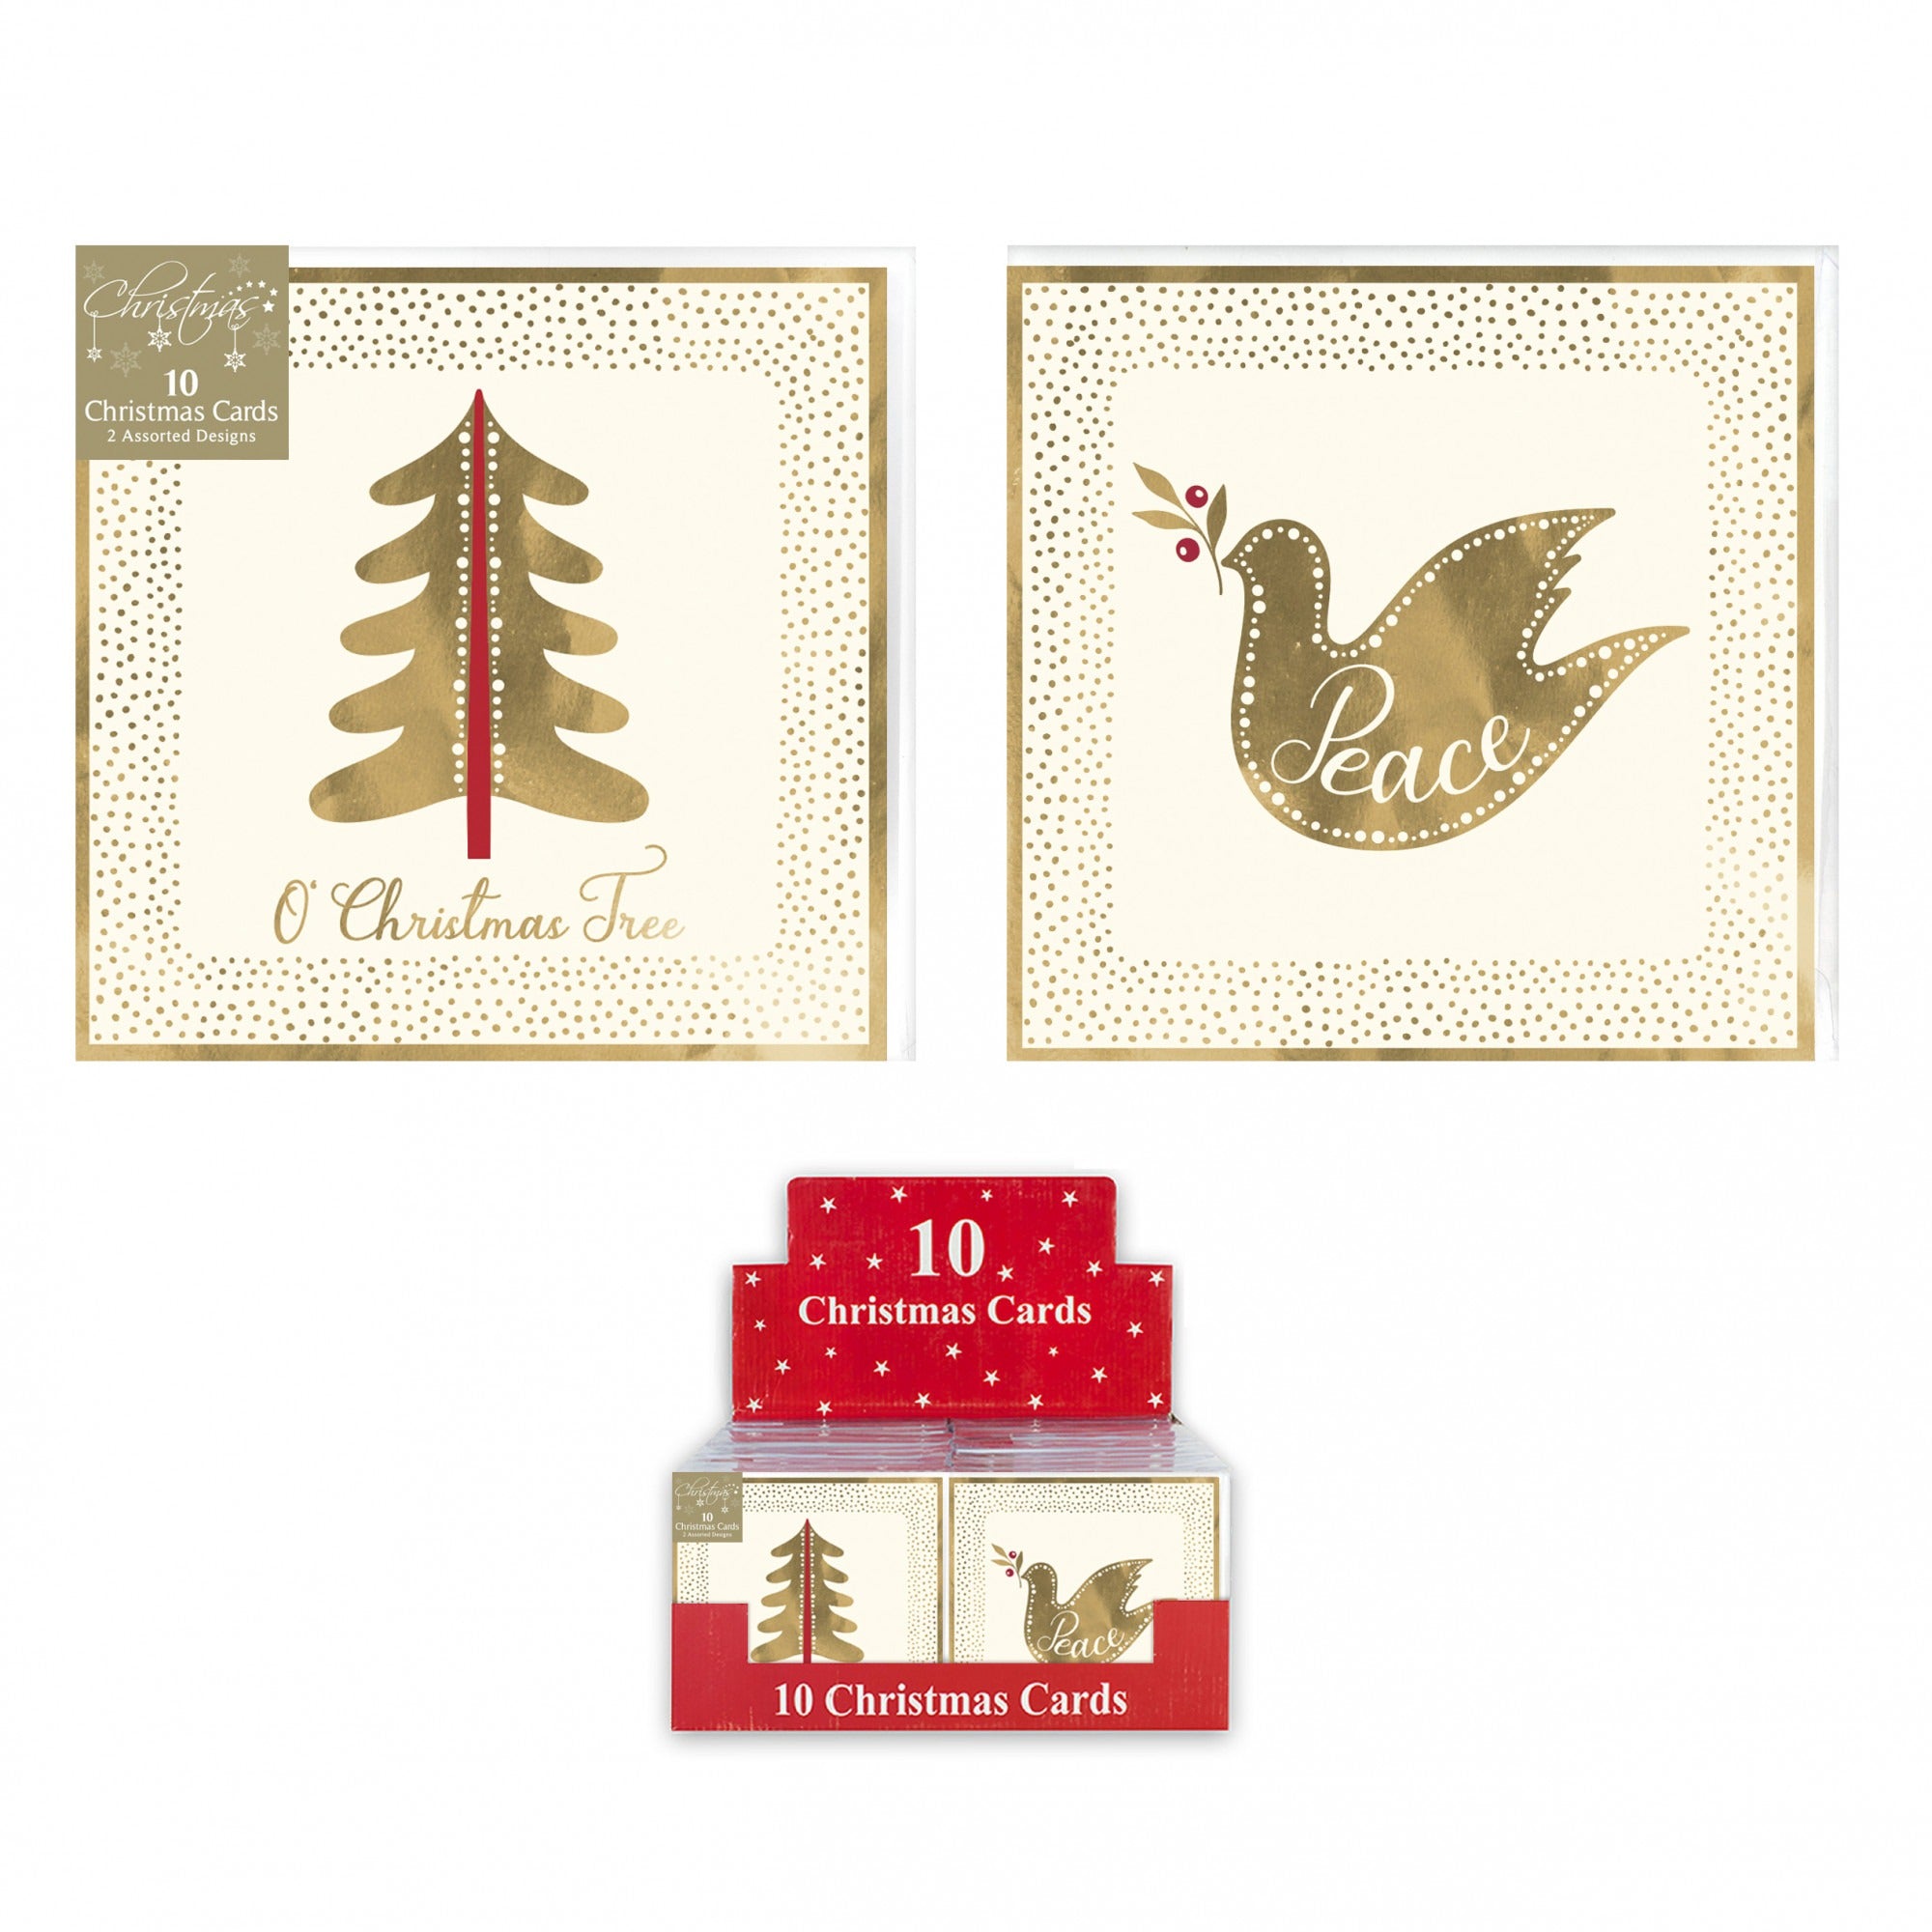 View 10 Gold Christmas Cards Dove or Tree Assorted Designs information